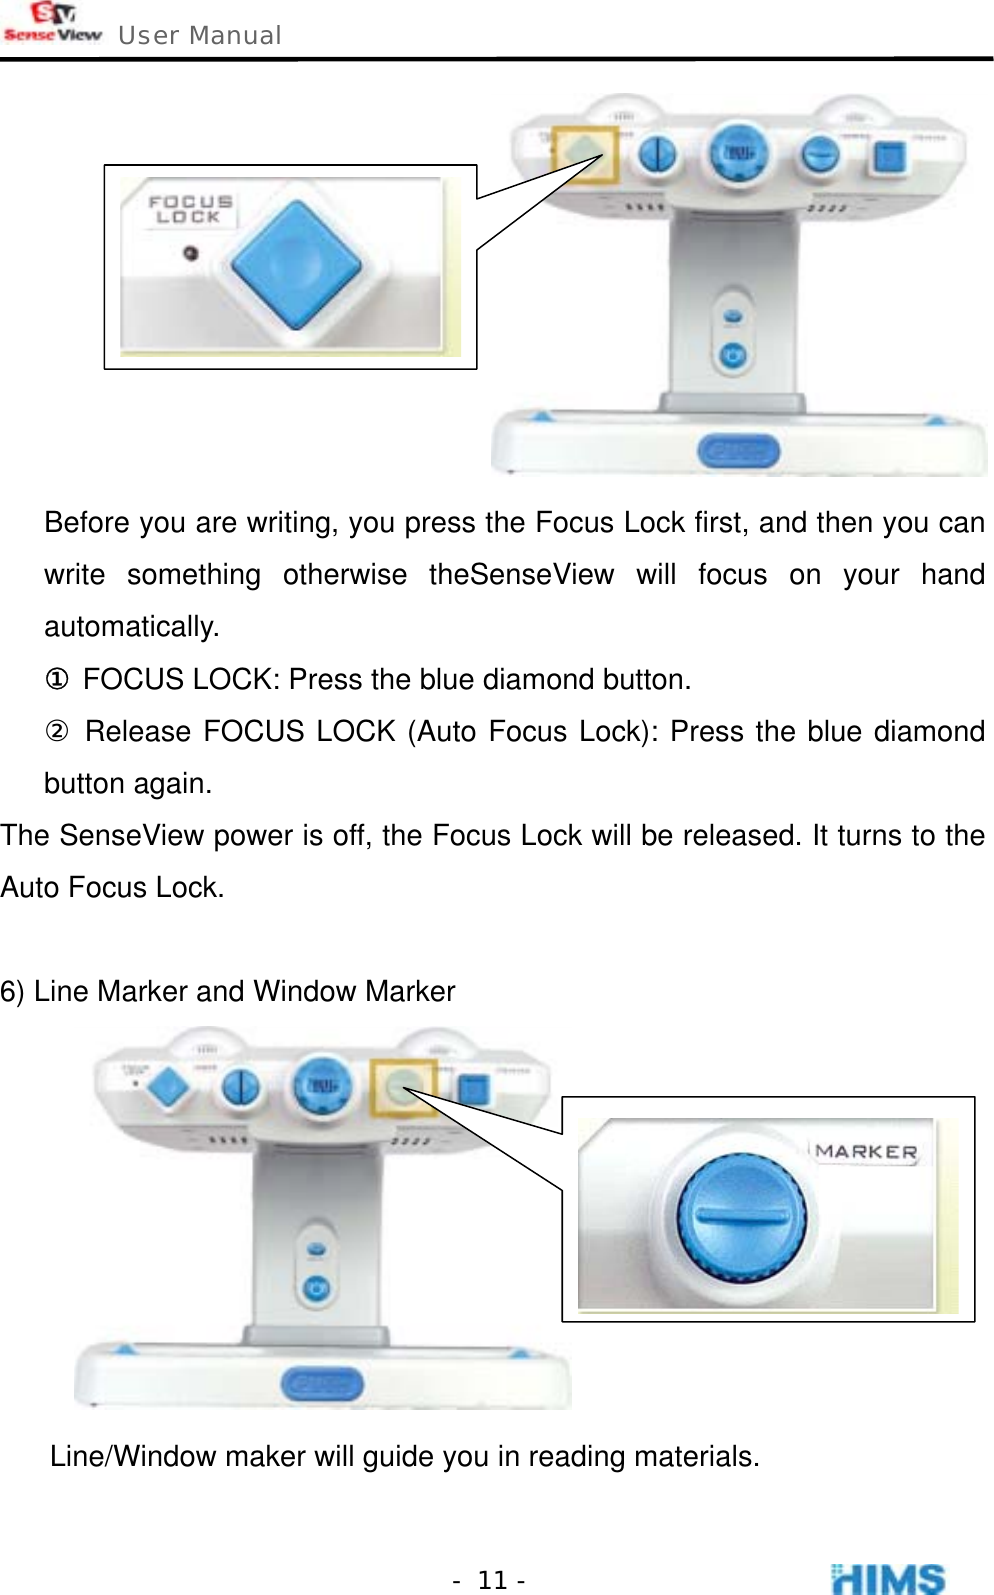  User Manual    - 11 - Before you are writing, you press the Focus Lock first, and then you can write something otherwise theSenseView will focus on your hand automatically. ① FOCUS LOCK: Press the blue diamond button. ② Release FOCUS LOCK (Auto Focus Lock): Press the blue diamond button again. The SenseView power is off, the Focus Lock will be released. It turns to the Auto Focus Lock.  6) Line Marker and Window Marker  Line/Window maker will guide you in reading materials. 